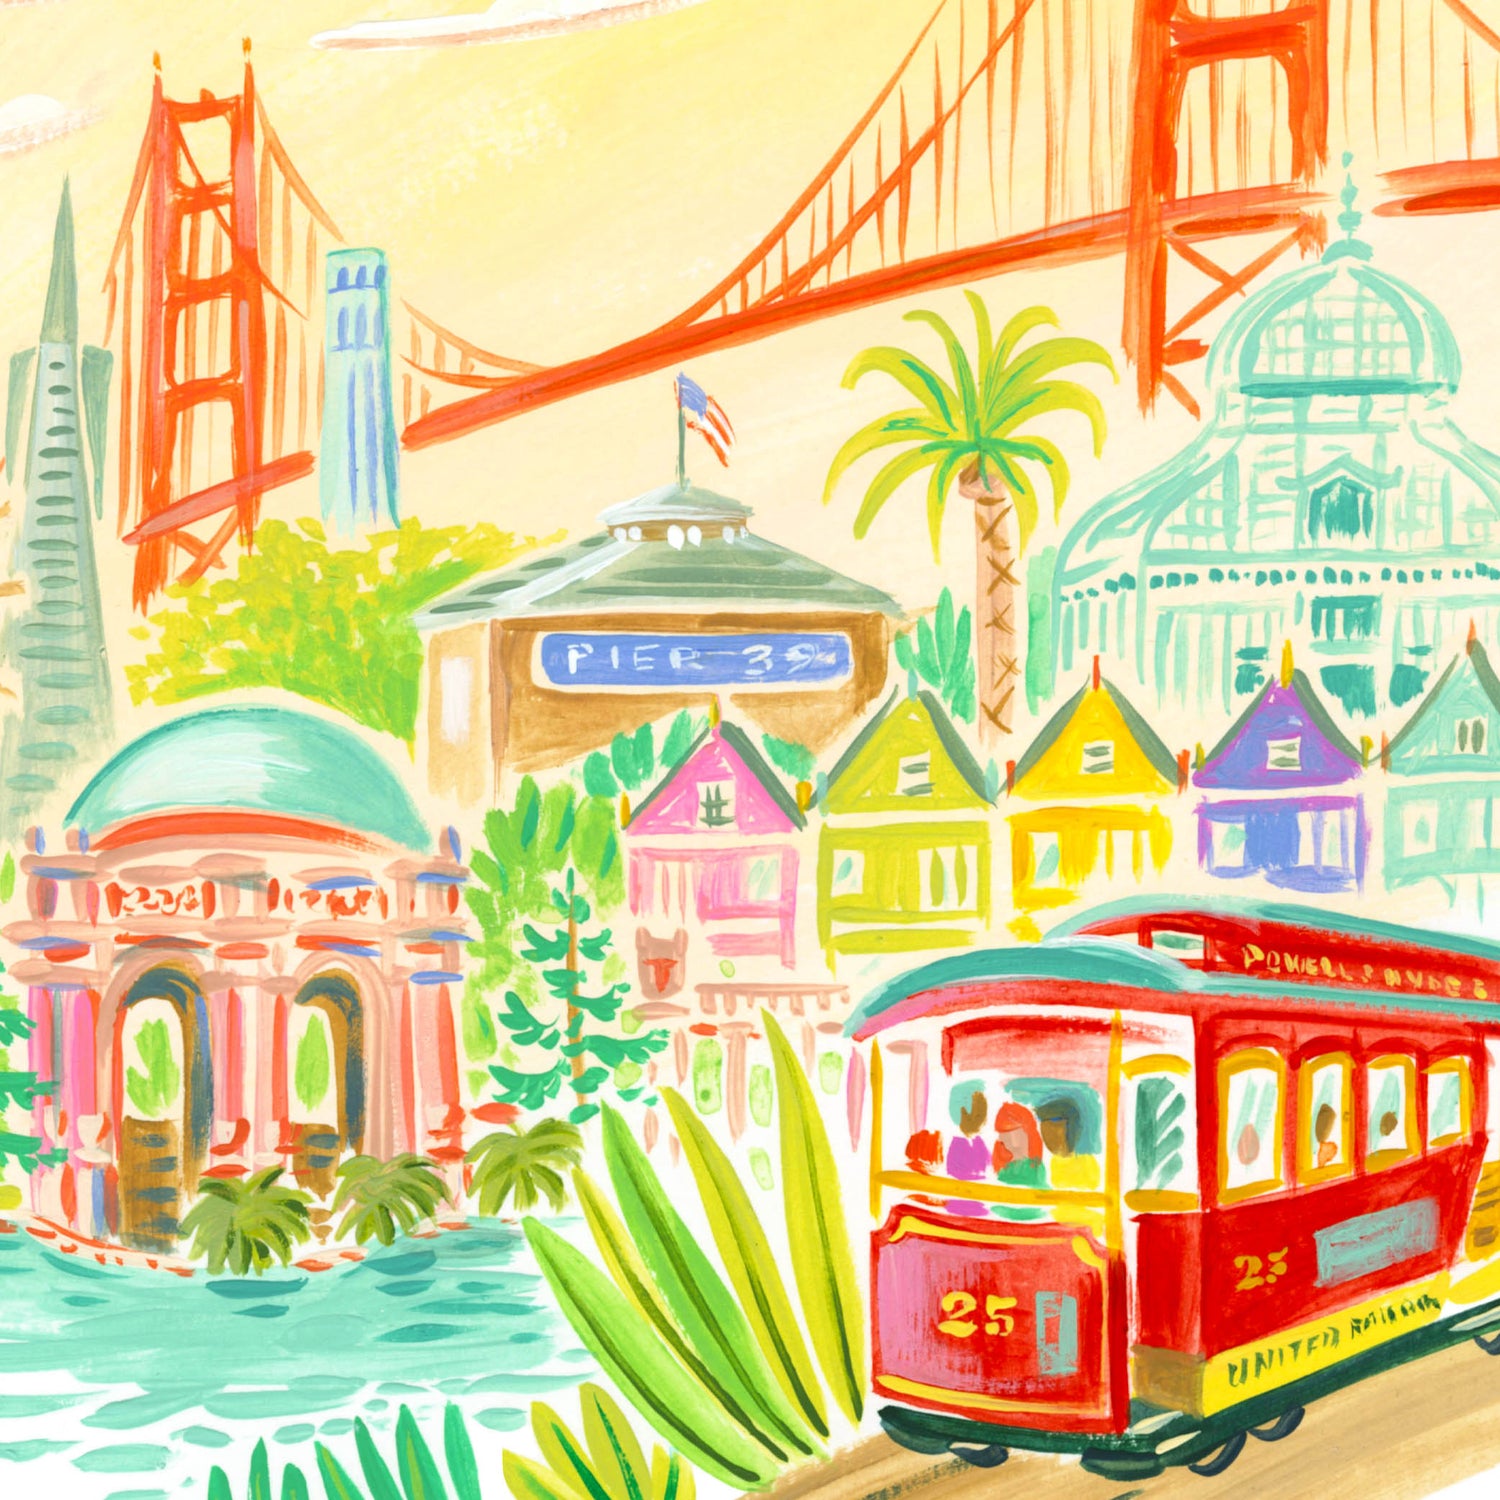 San Francisco Skyline art detail with Golden Gate Bridge, trolley car, and Fisherman's Wharf; trendy illustration by Angela Staehling